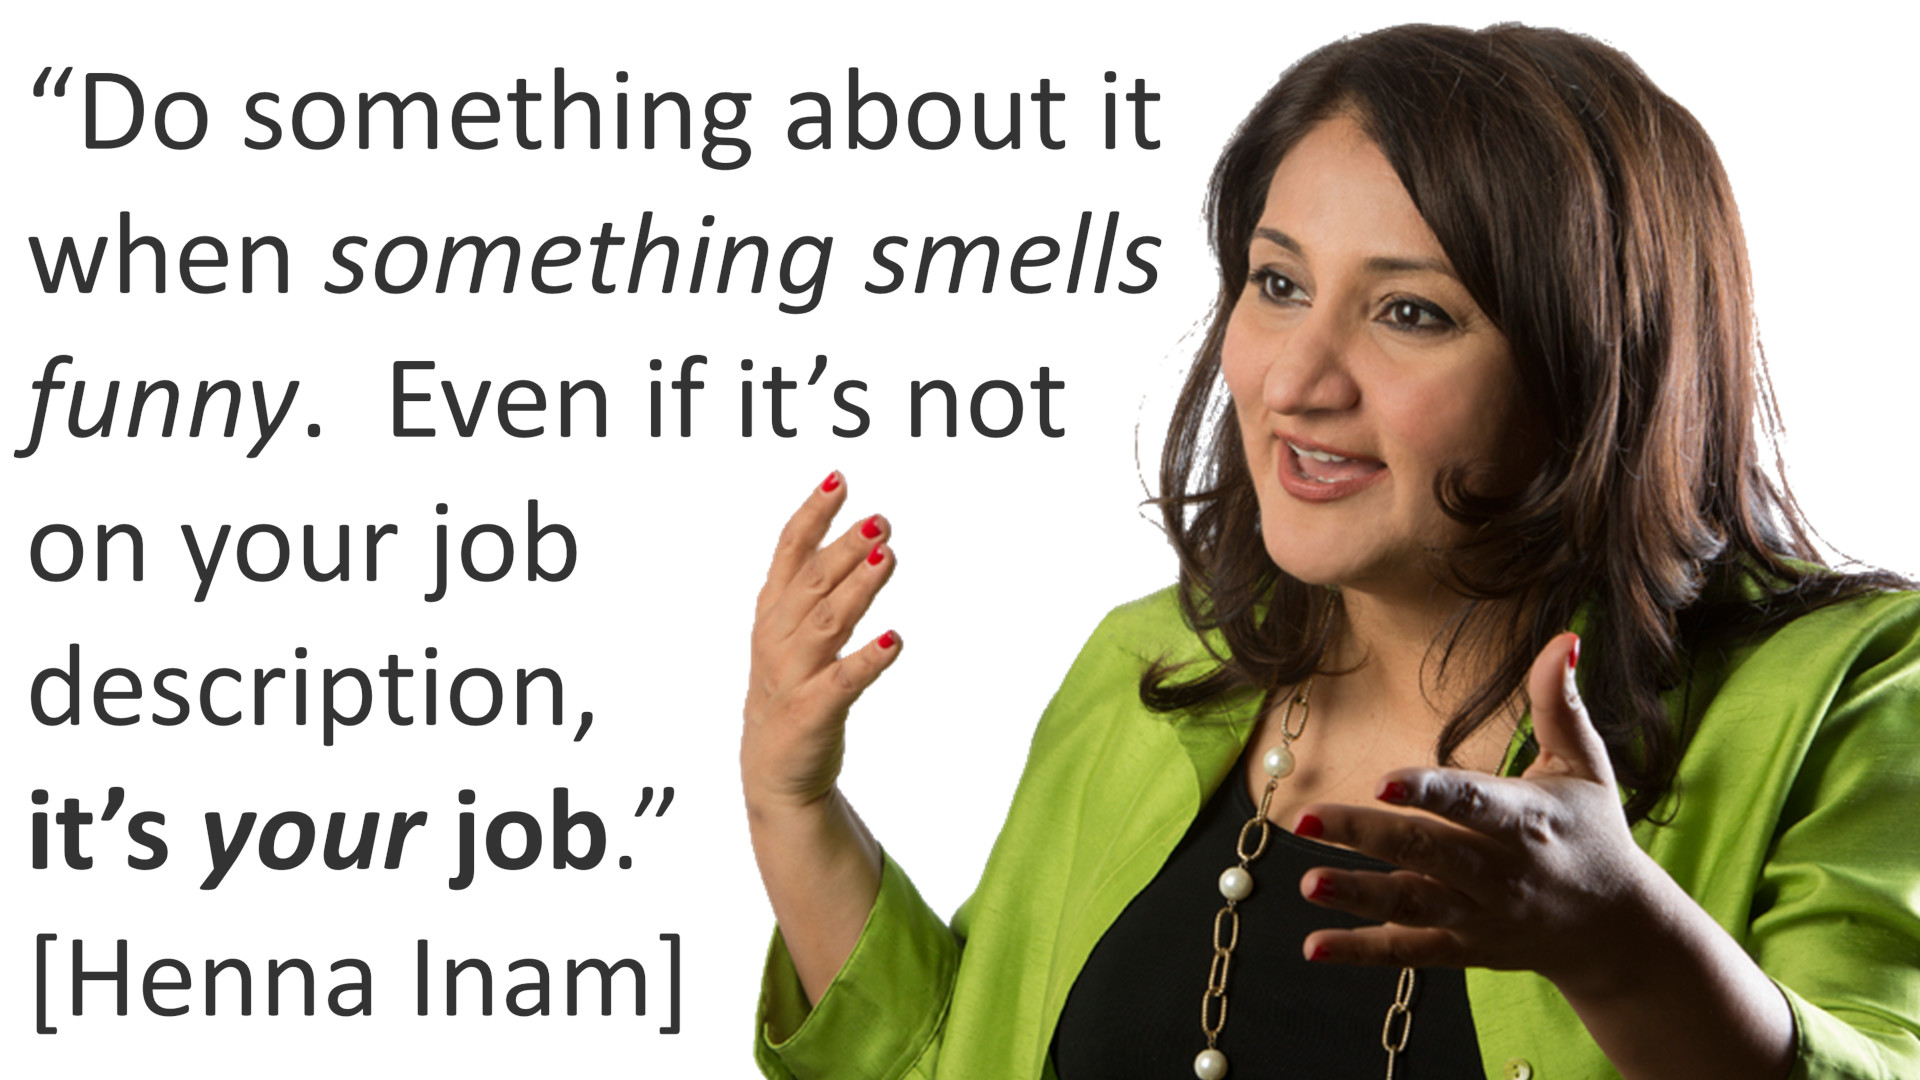 Quote by Henna Inam: Do something about it when something smells funny. Even if it's not on your job description, it's your job.